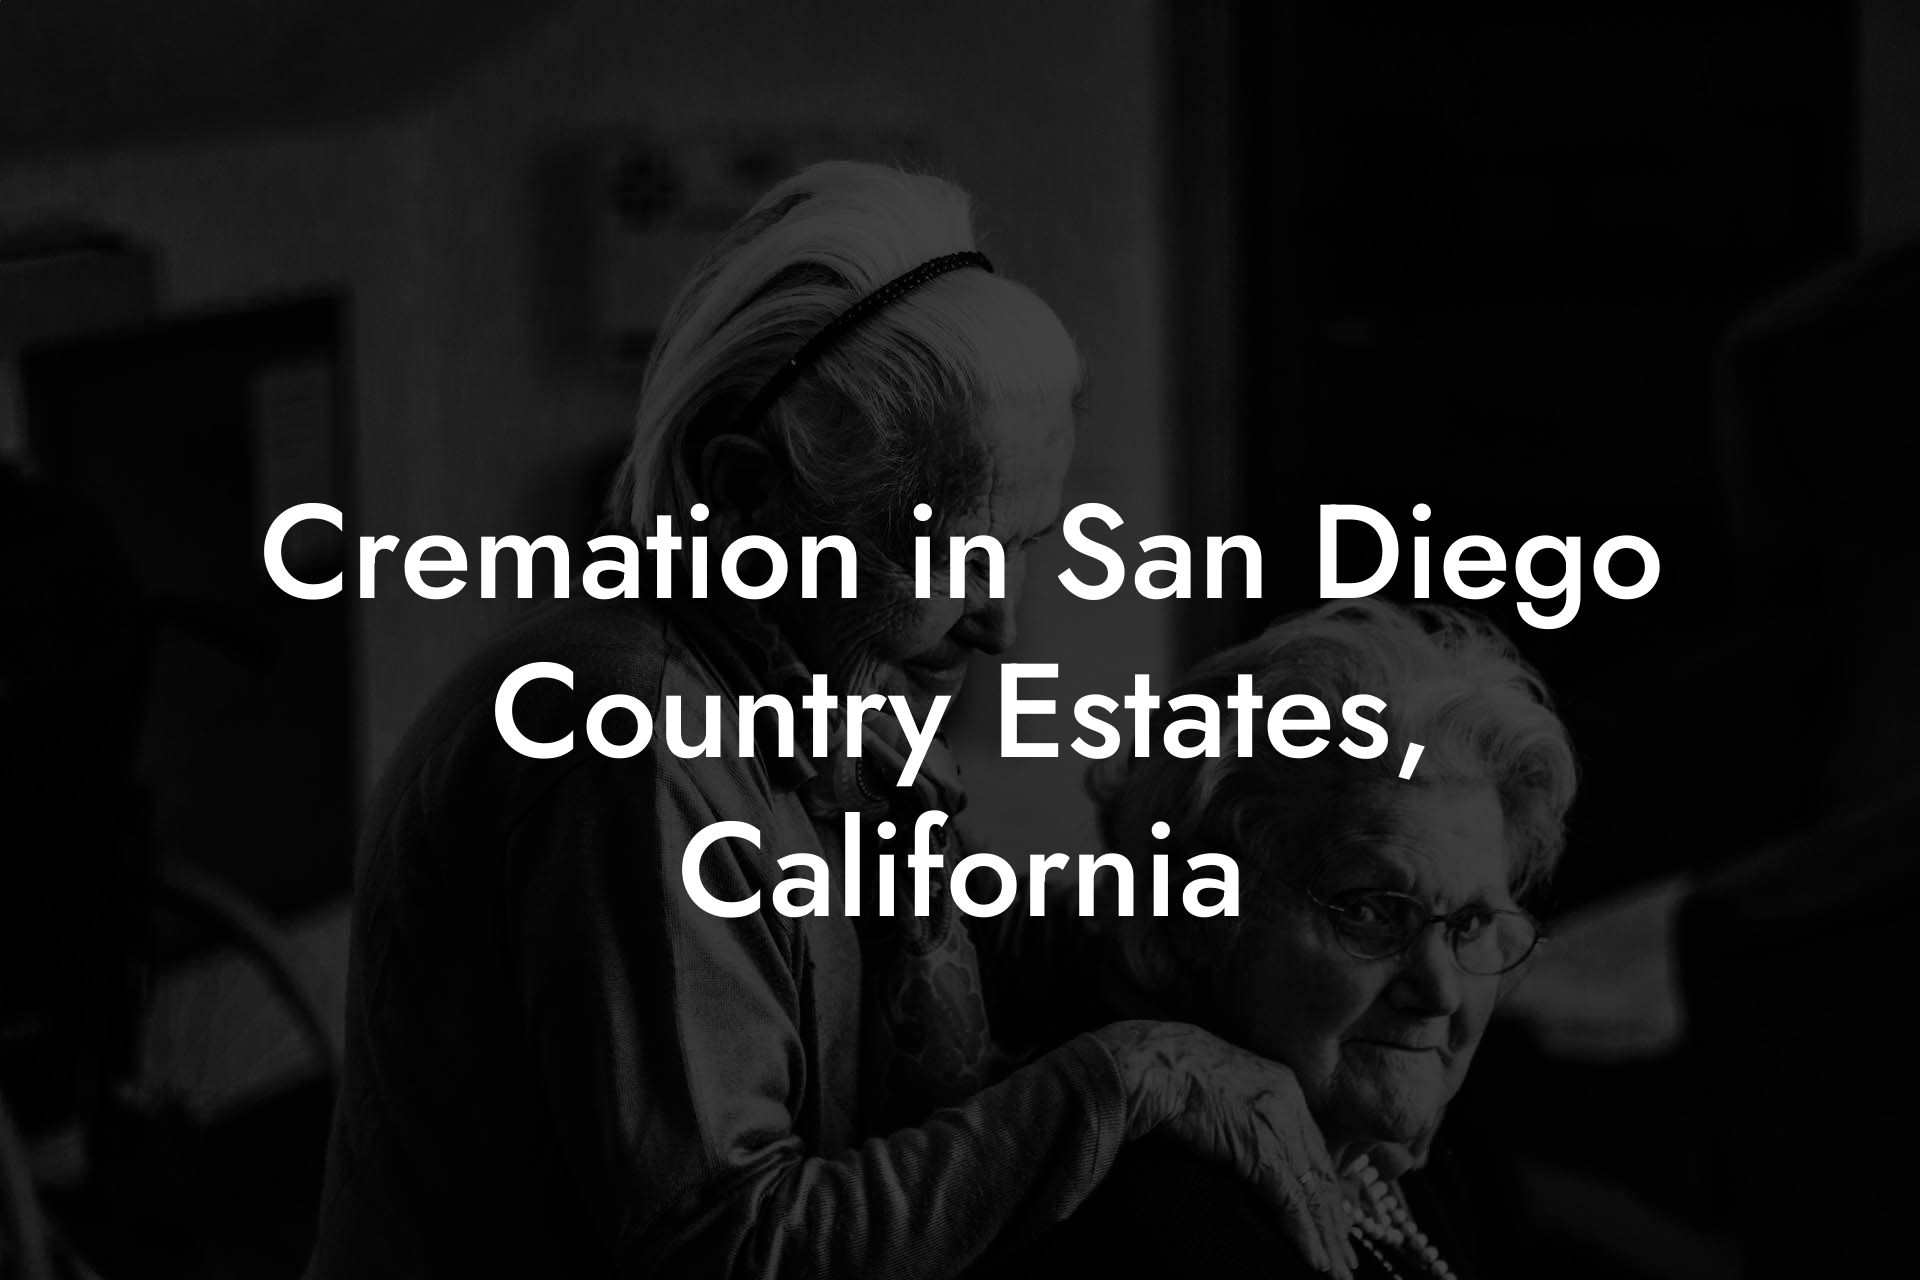 Cremation in San Diego Country Estates, California